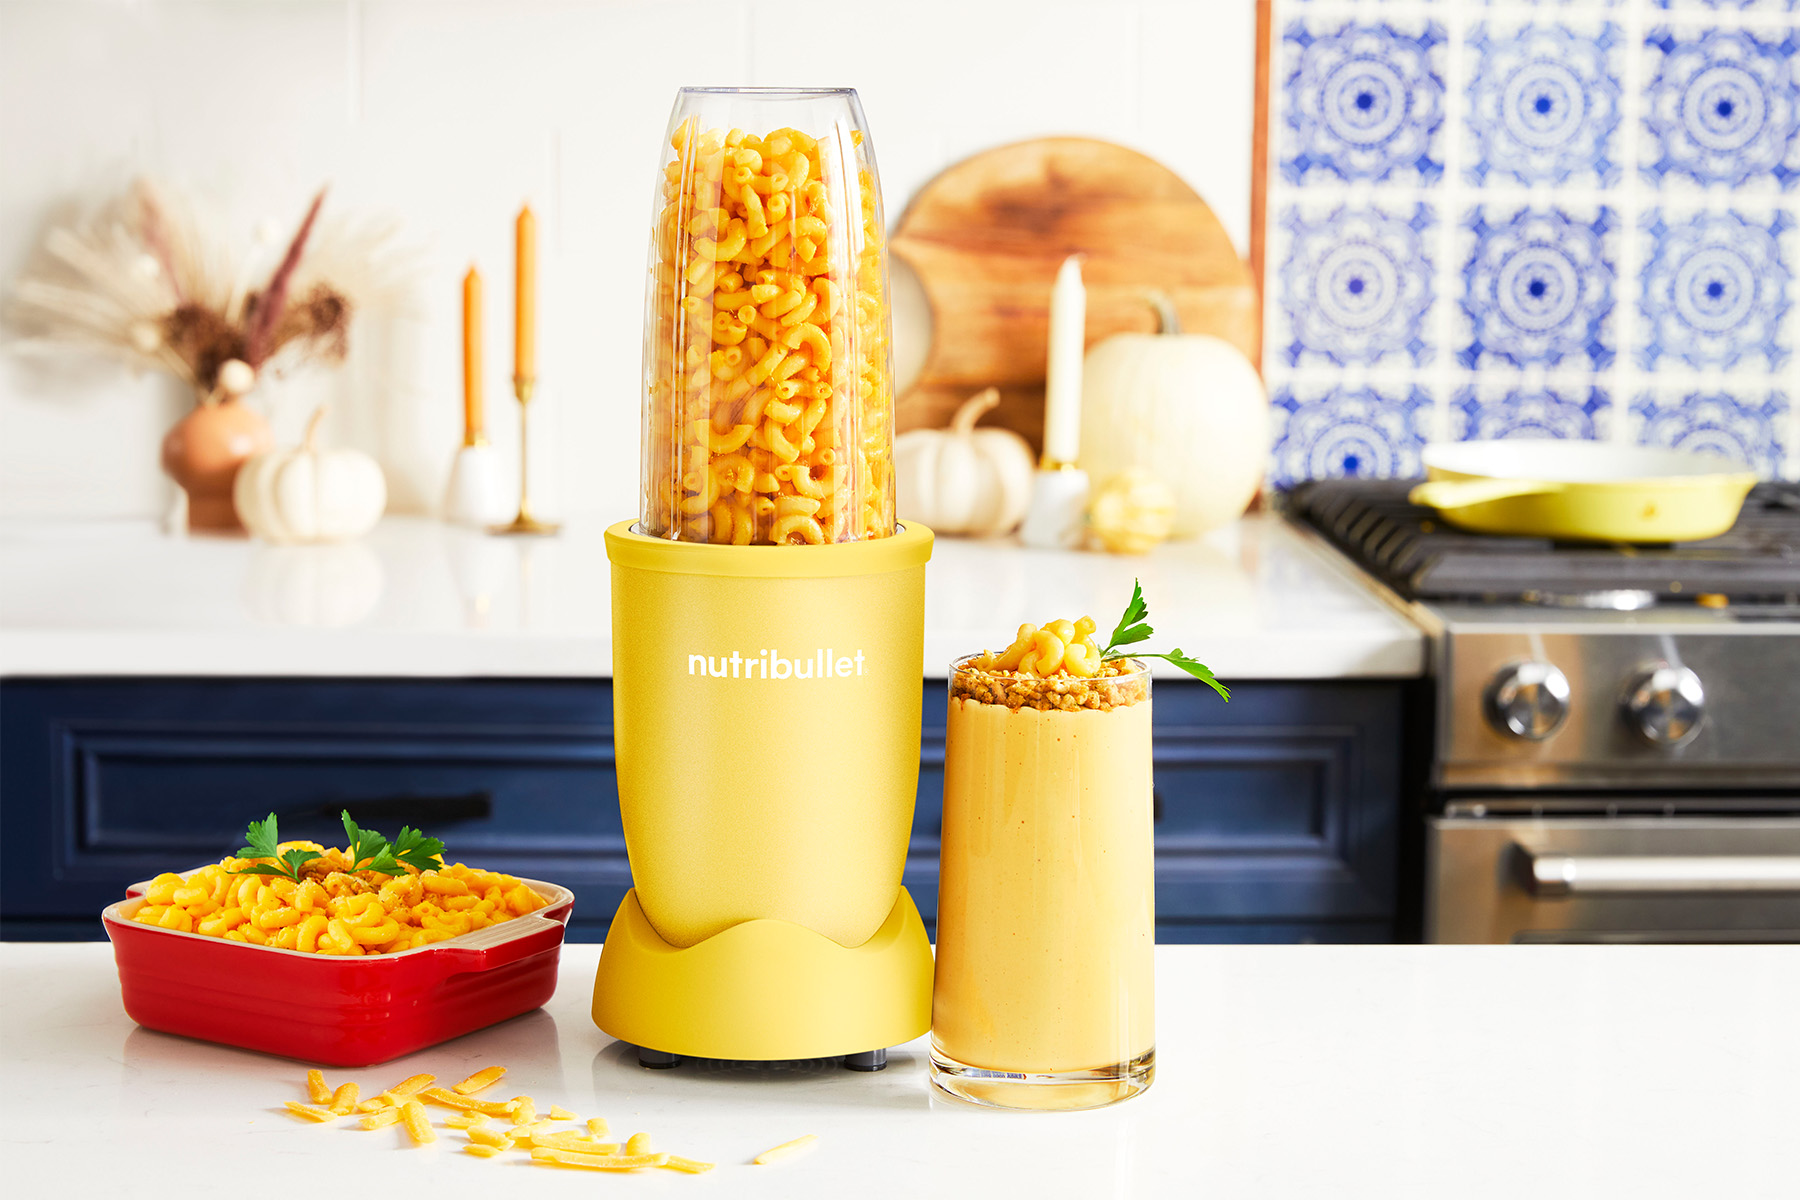 Mac and Cheese in a tray next to a yellow nutribullet blender filled with macaroni next to a blended glass of mac and cheese